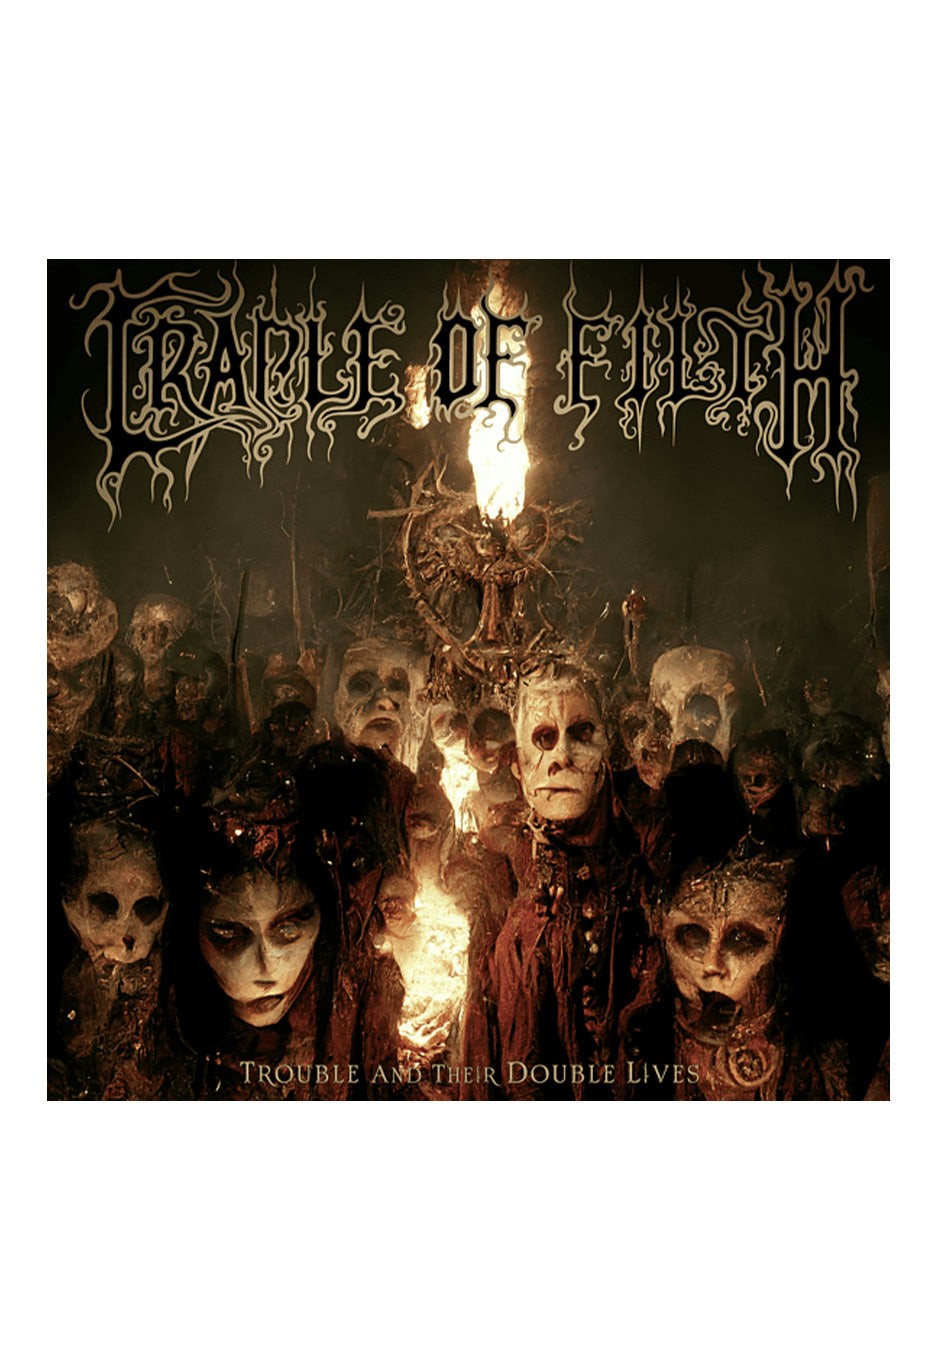 Cradle Of Filth - Trouble And Their Double Lives Silver - Colored 2 Vinyl